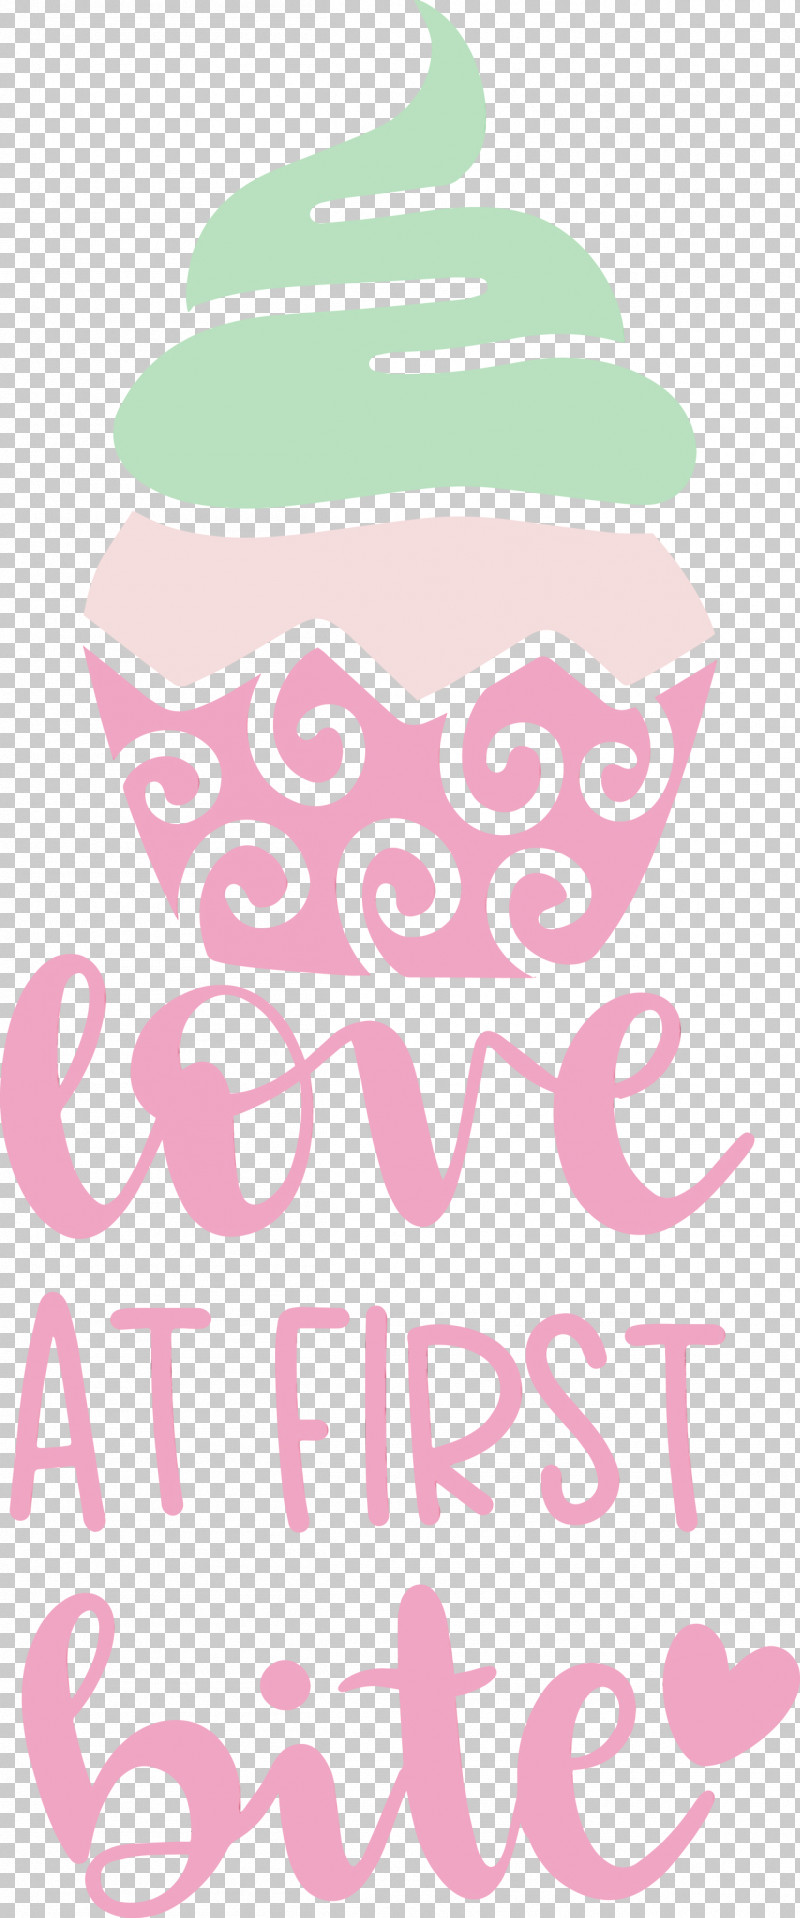 Cupcake Cake Poster Text PNG, Clipart, Cake, Cooking, Cupcake, Food, Kitchen Free PNG Download